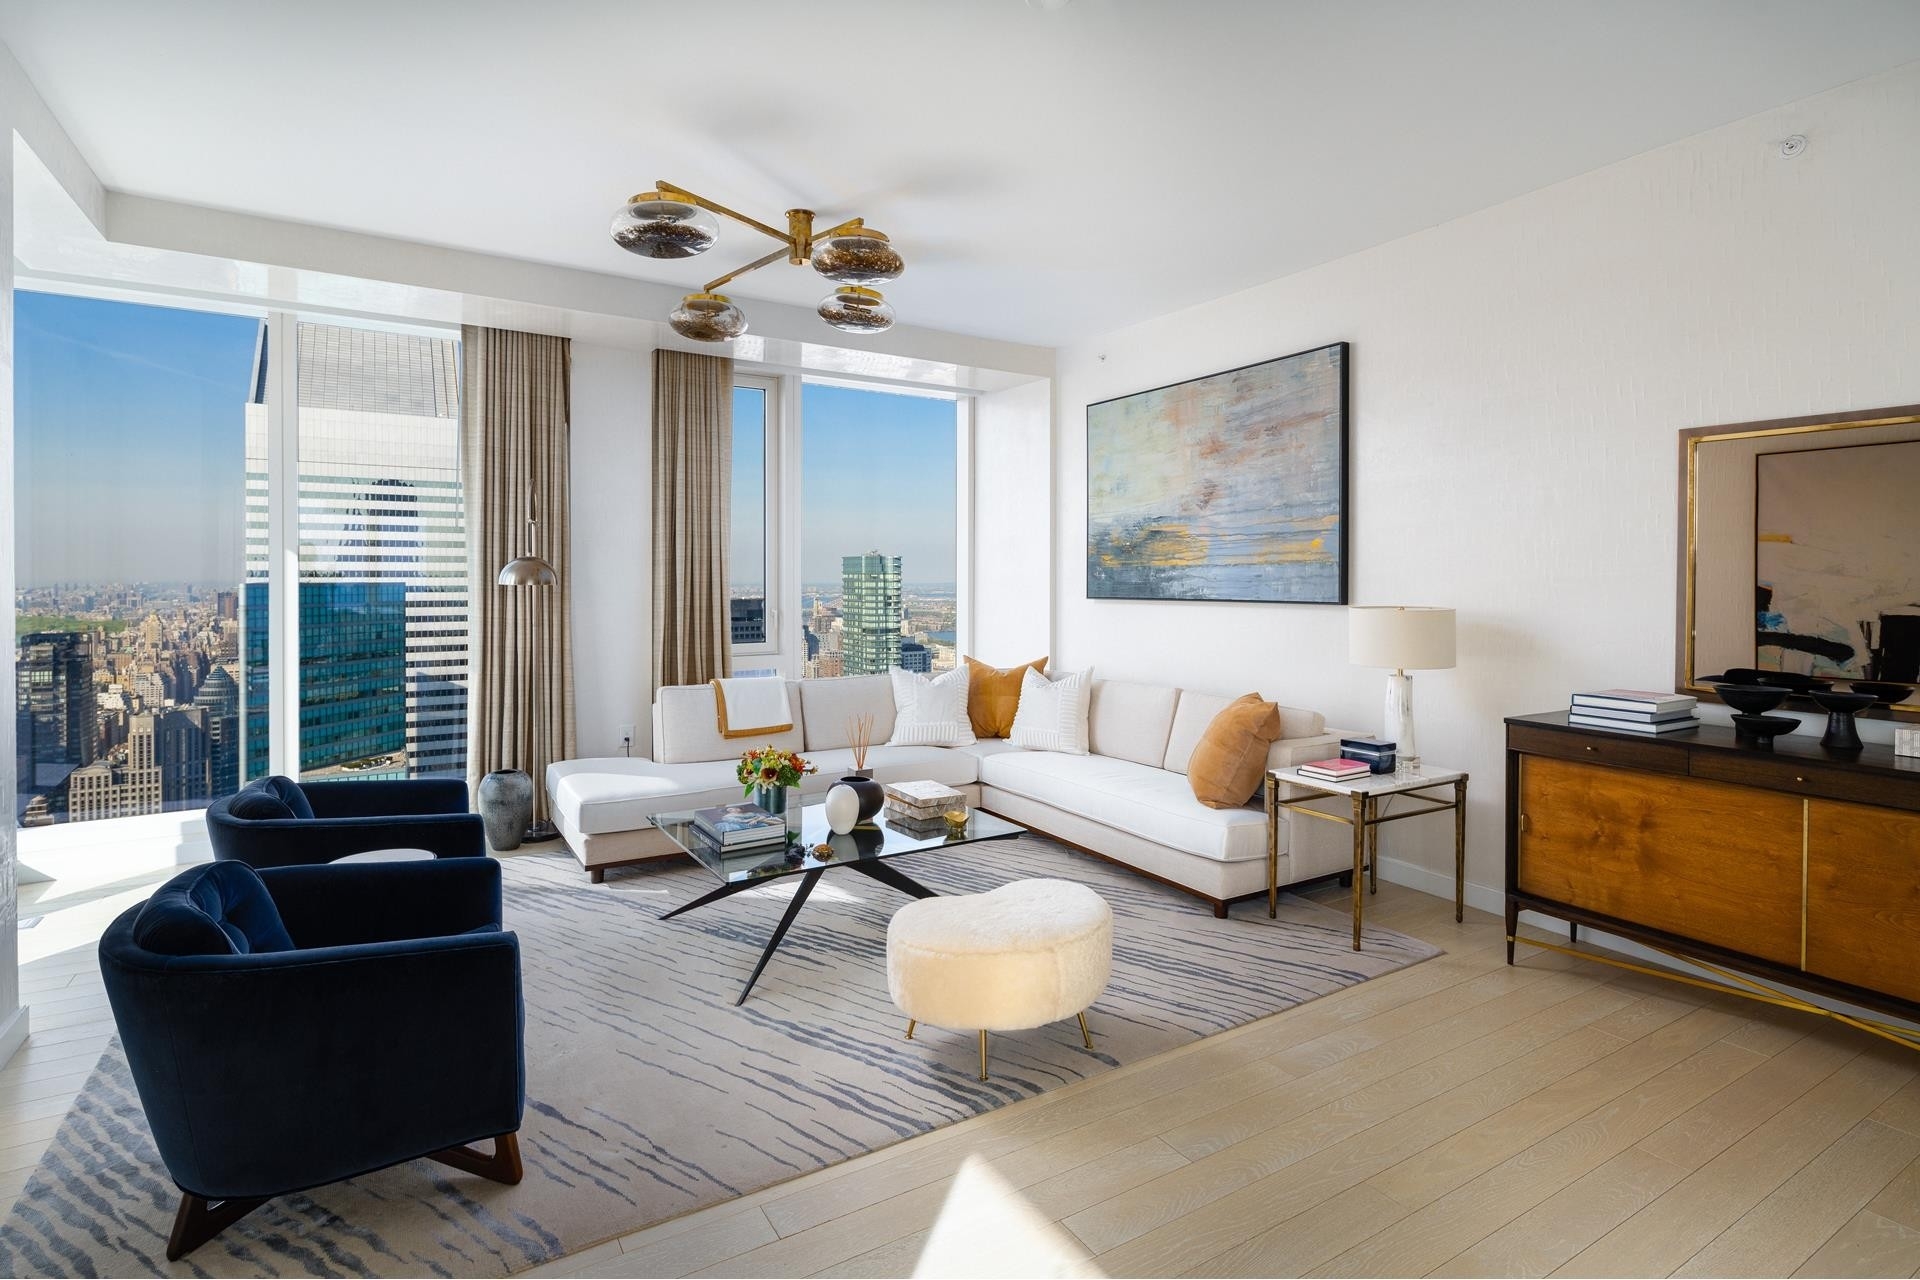 2. Condominiums for Sale at The Centrale, 138 E 50TH ST, 61 Turtle Bay, New York, New York 10022